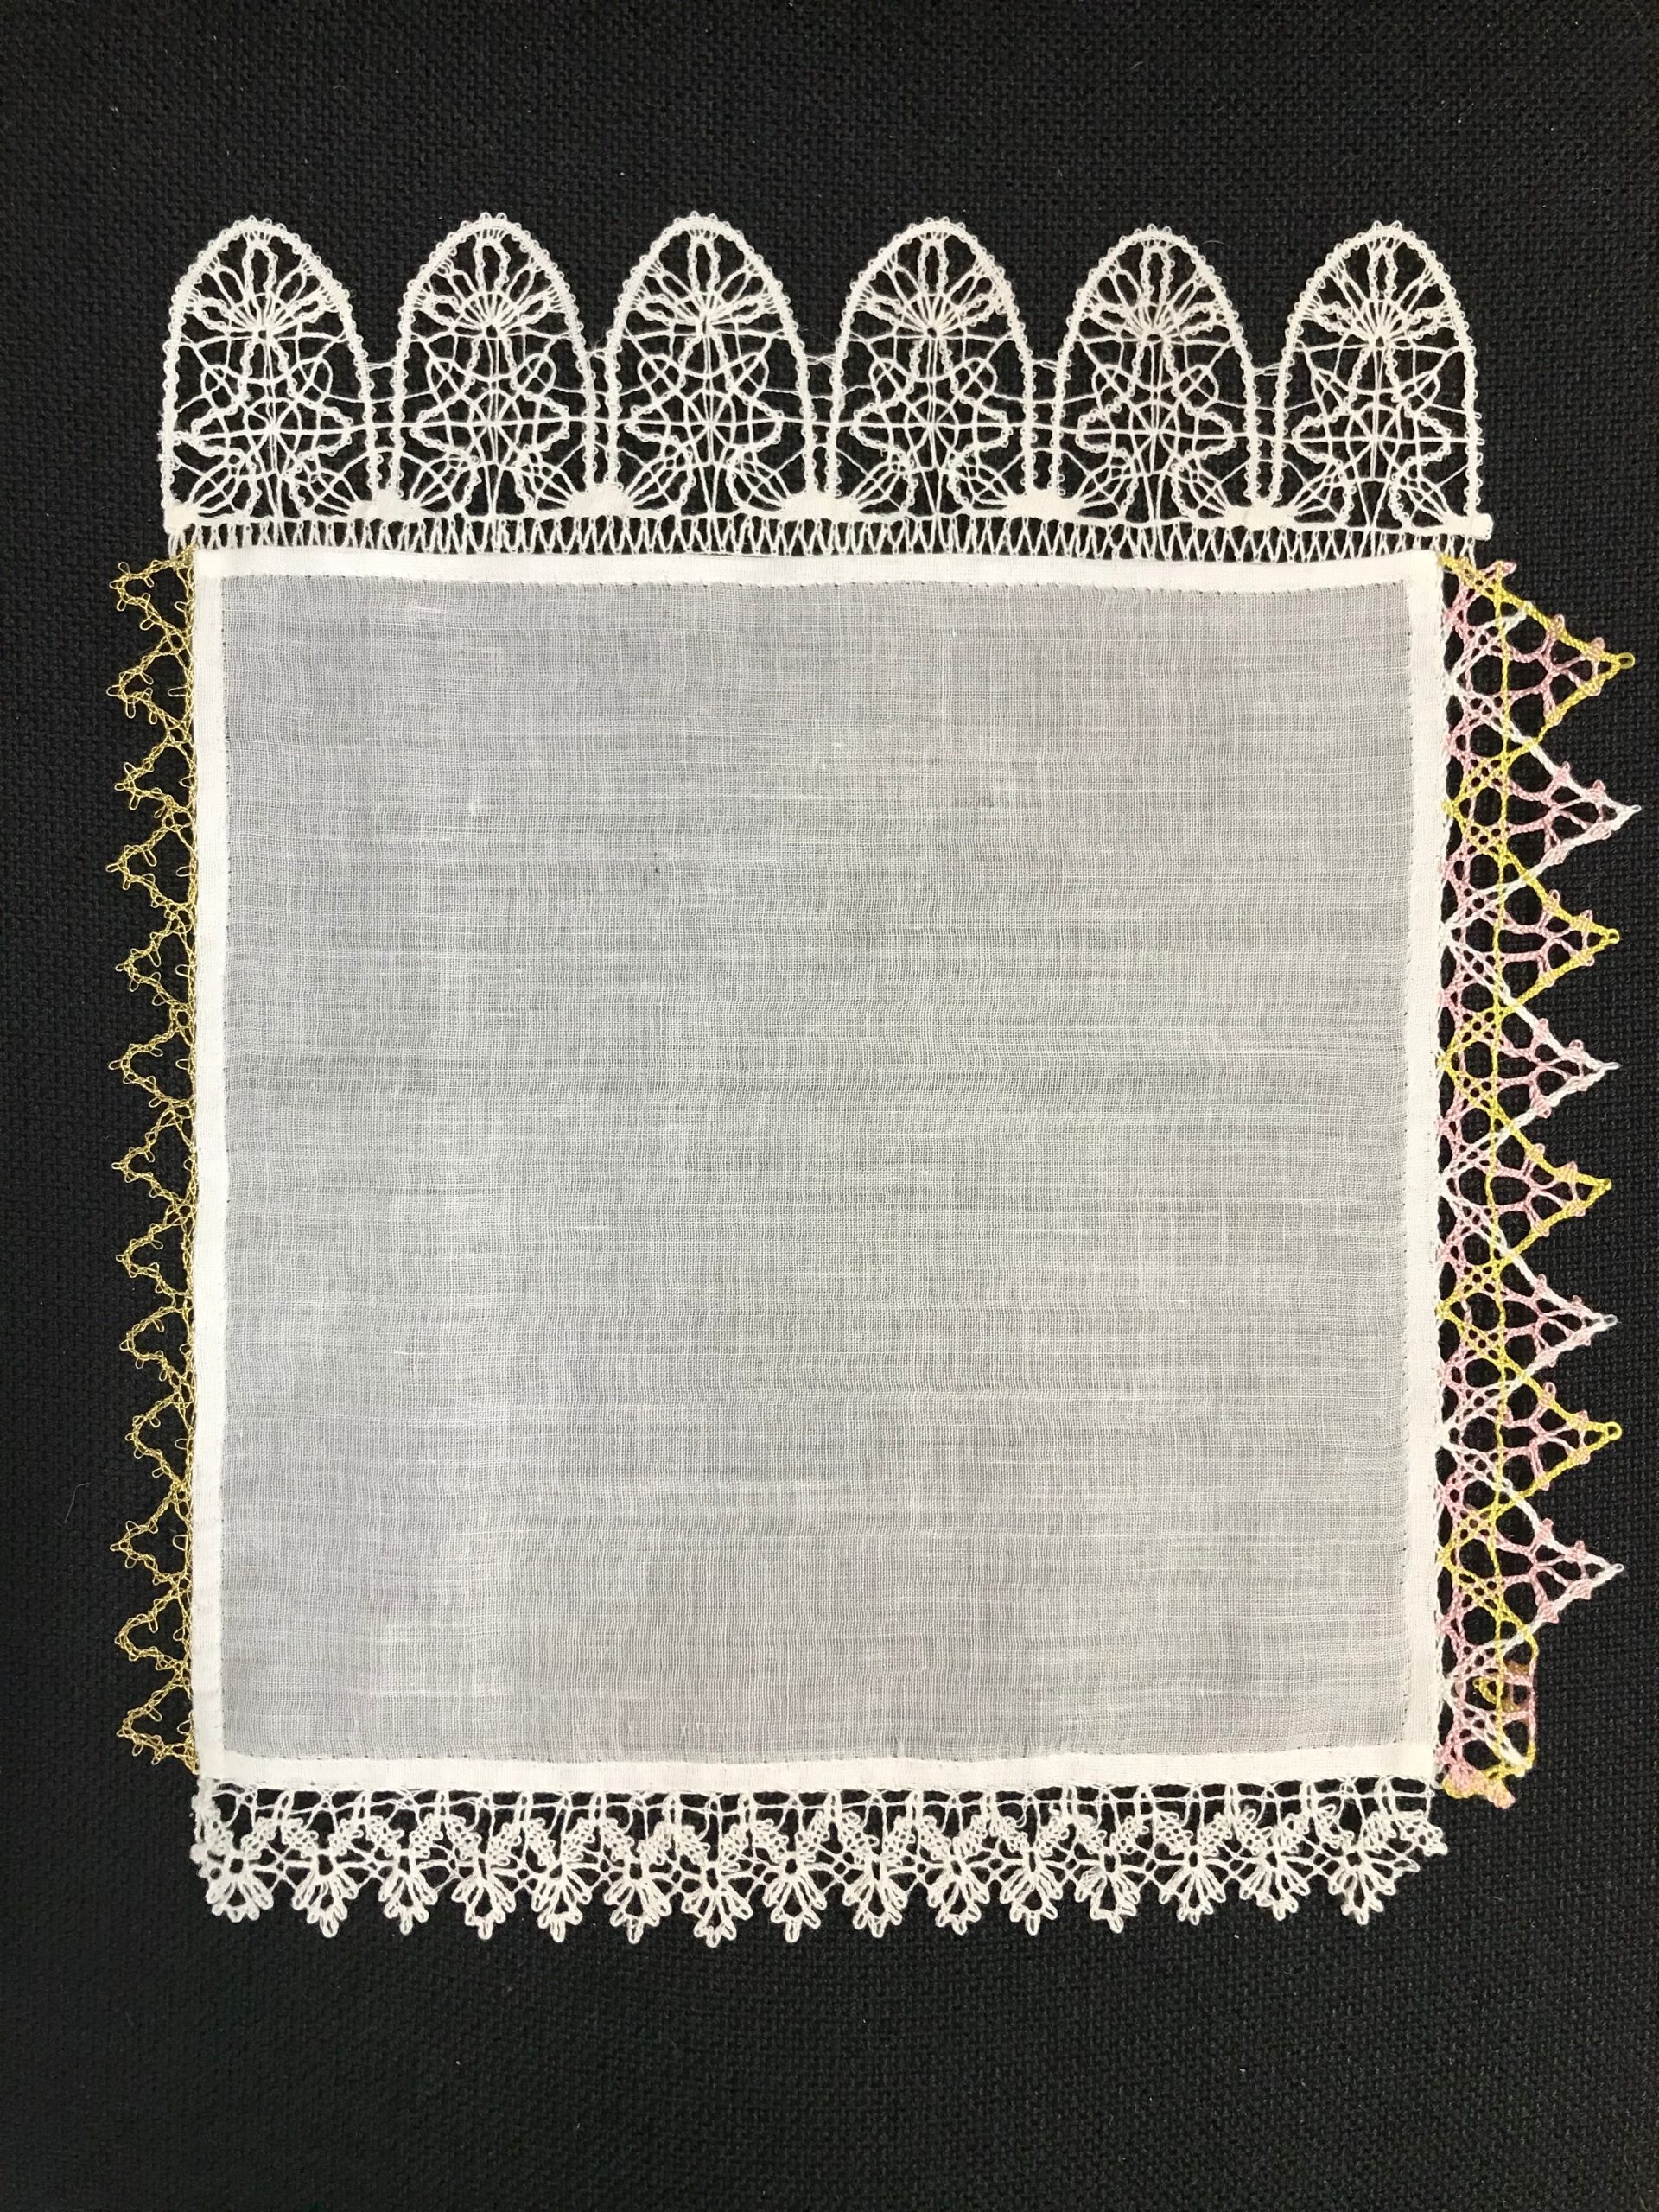 Handkerchief with 4 lace edgings